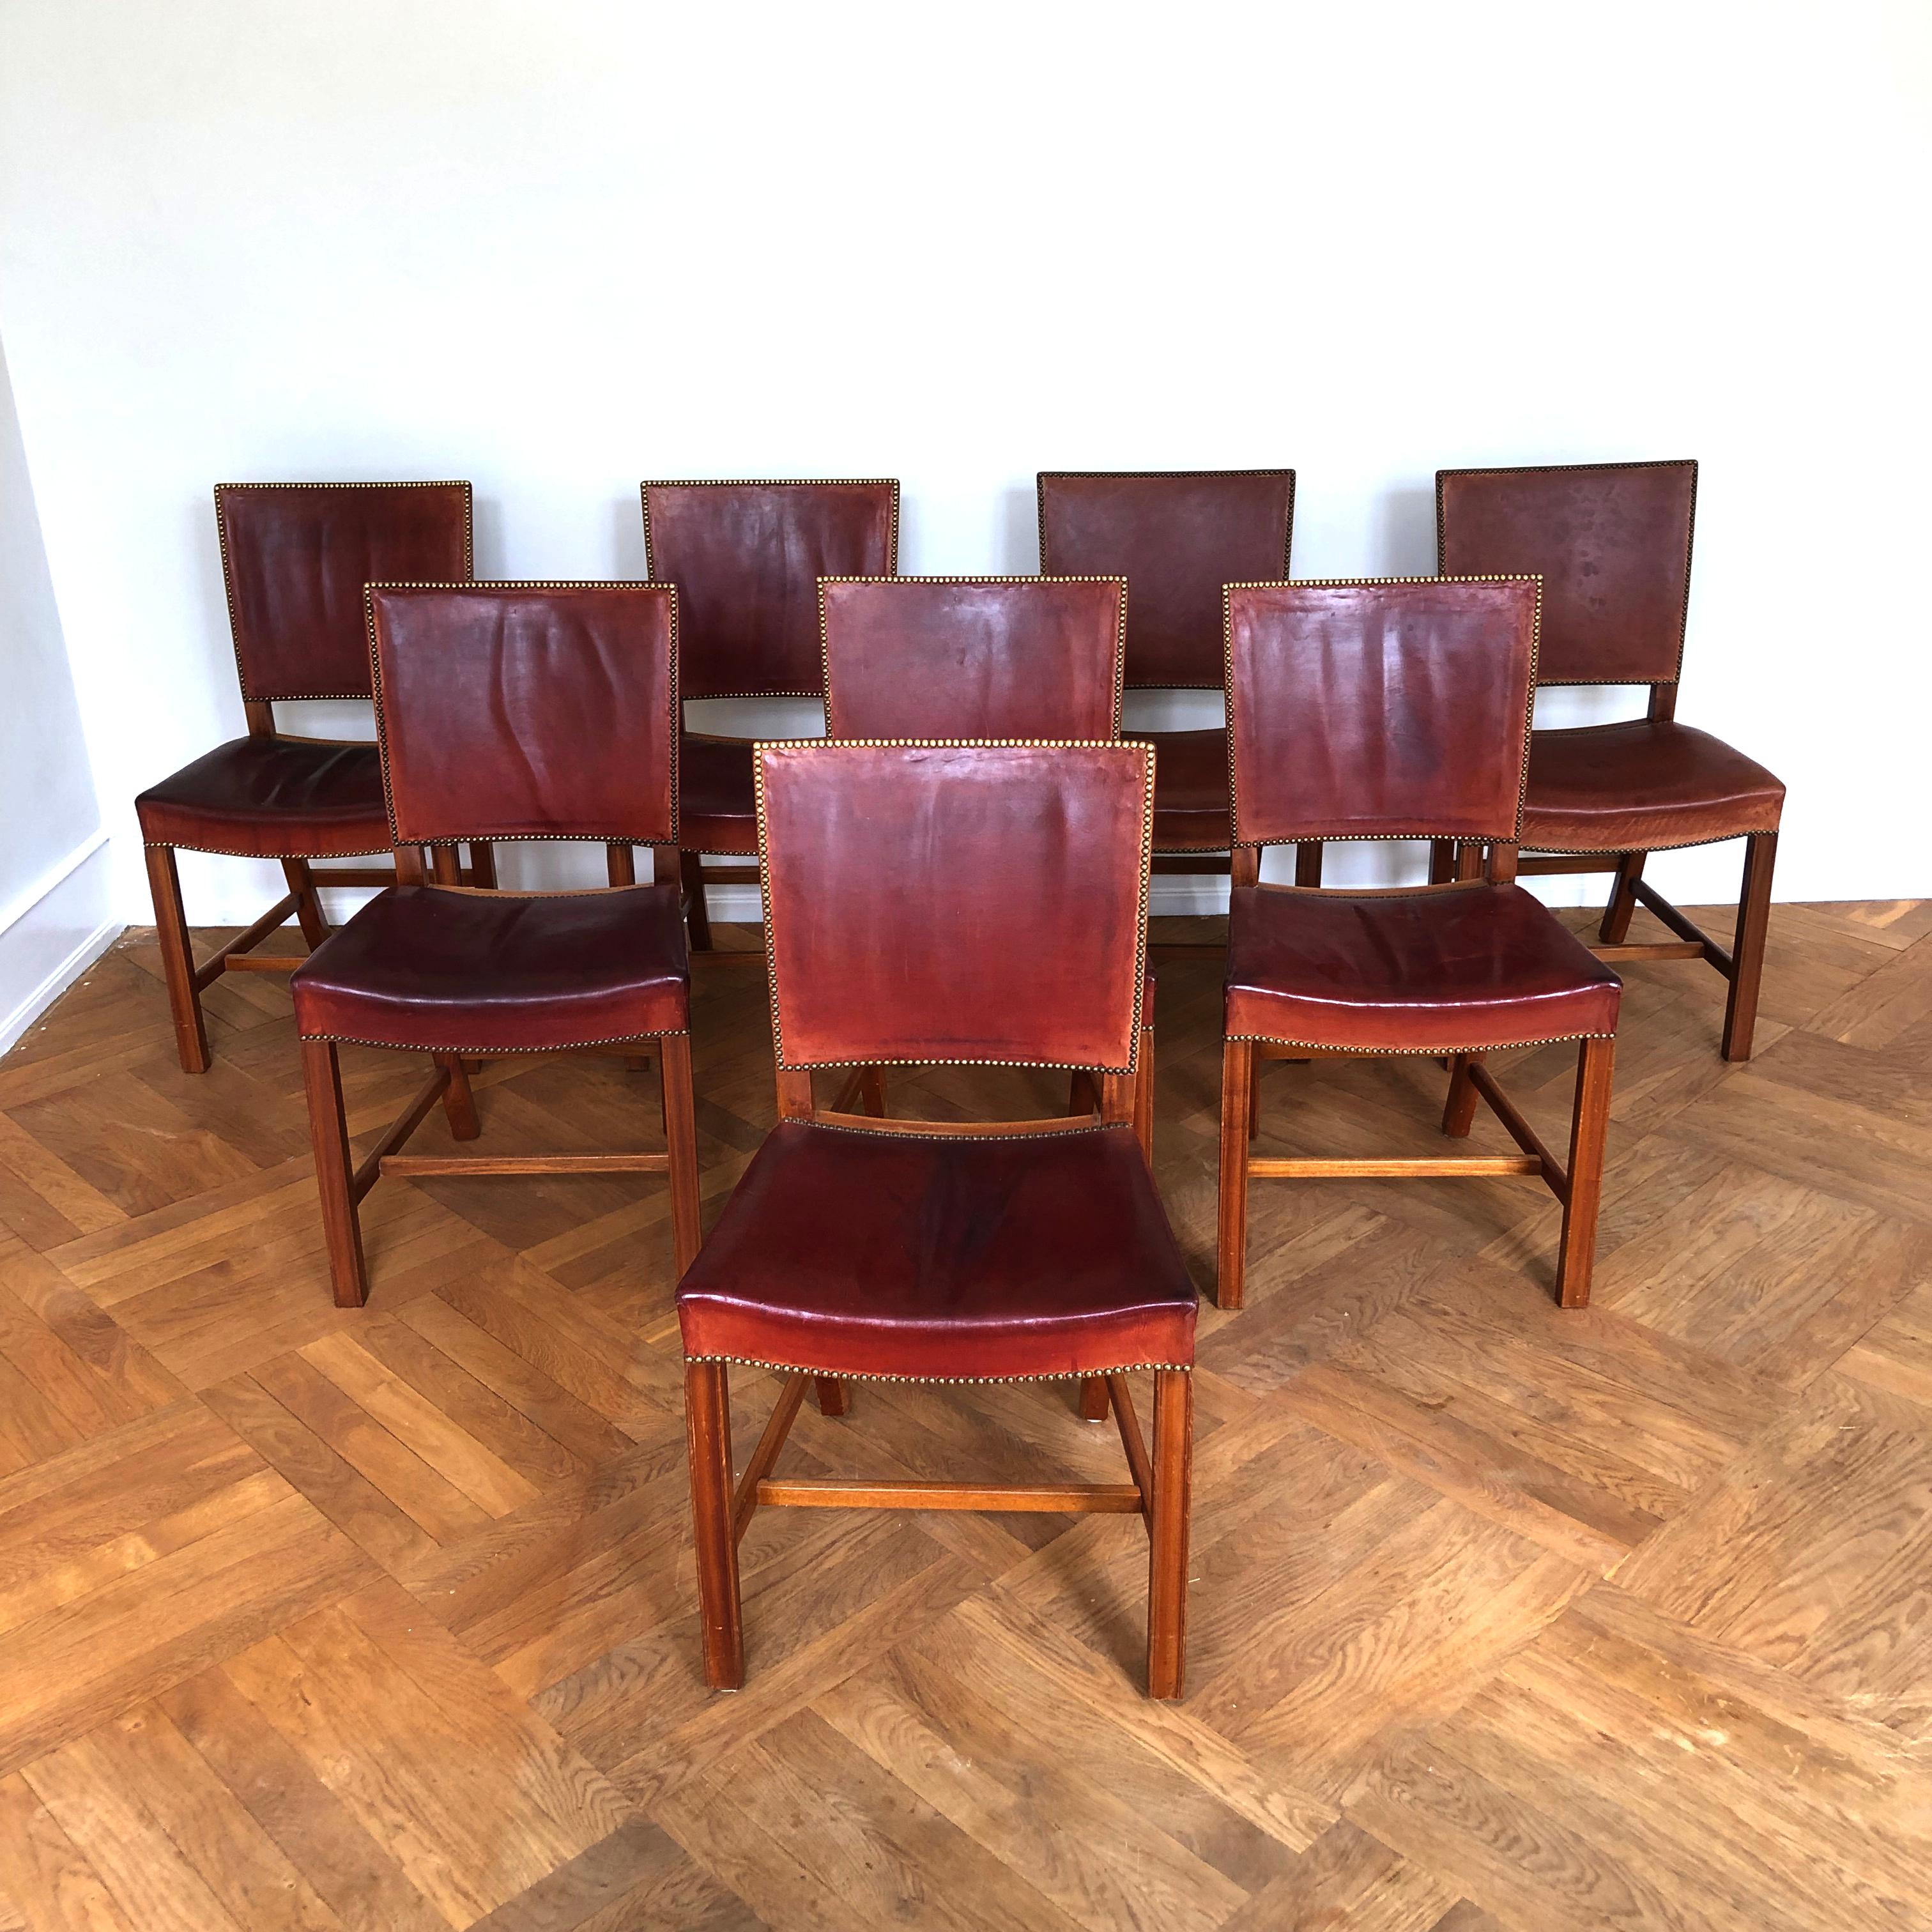 20th Century Set of 8 Exceptional Kaare Klint Red Chairs in Original Niger Leather